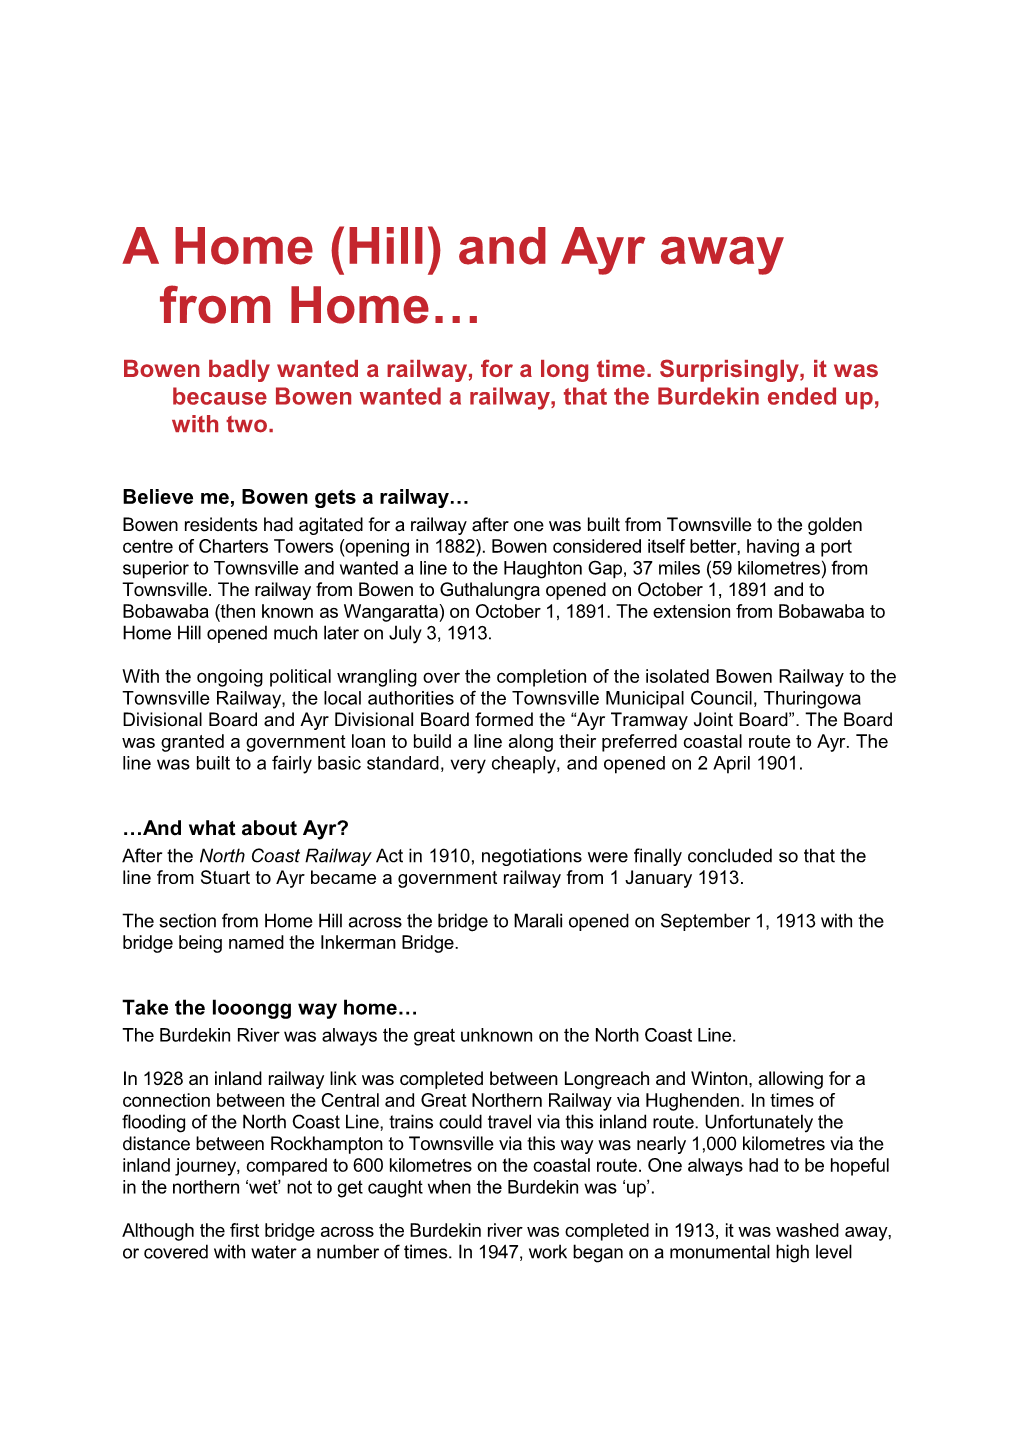 A Home (Hill) and Ayr Away from Home